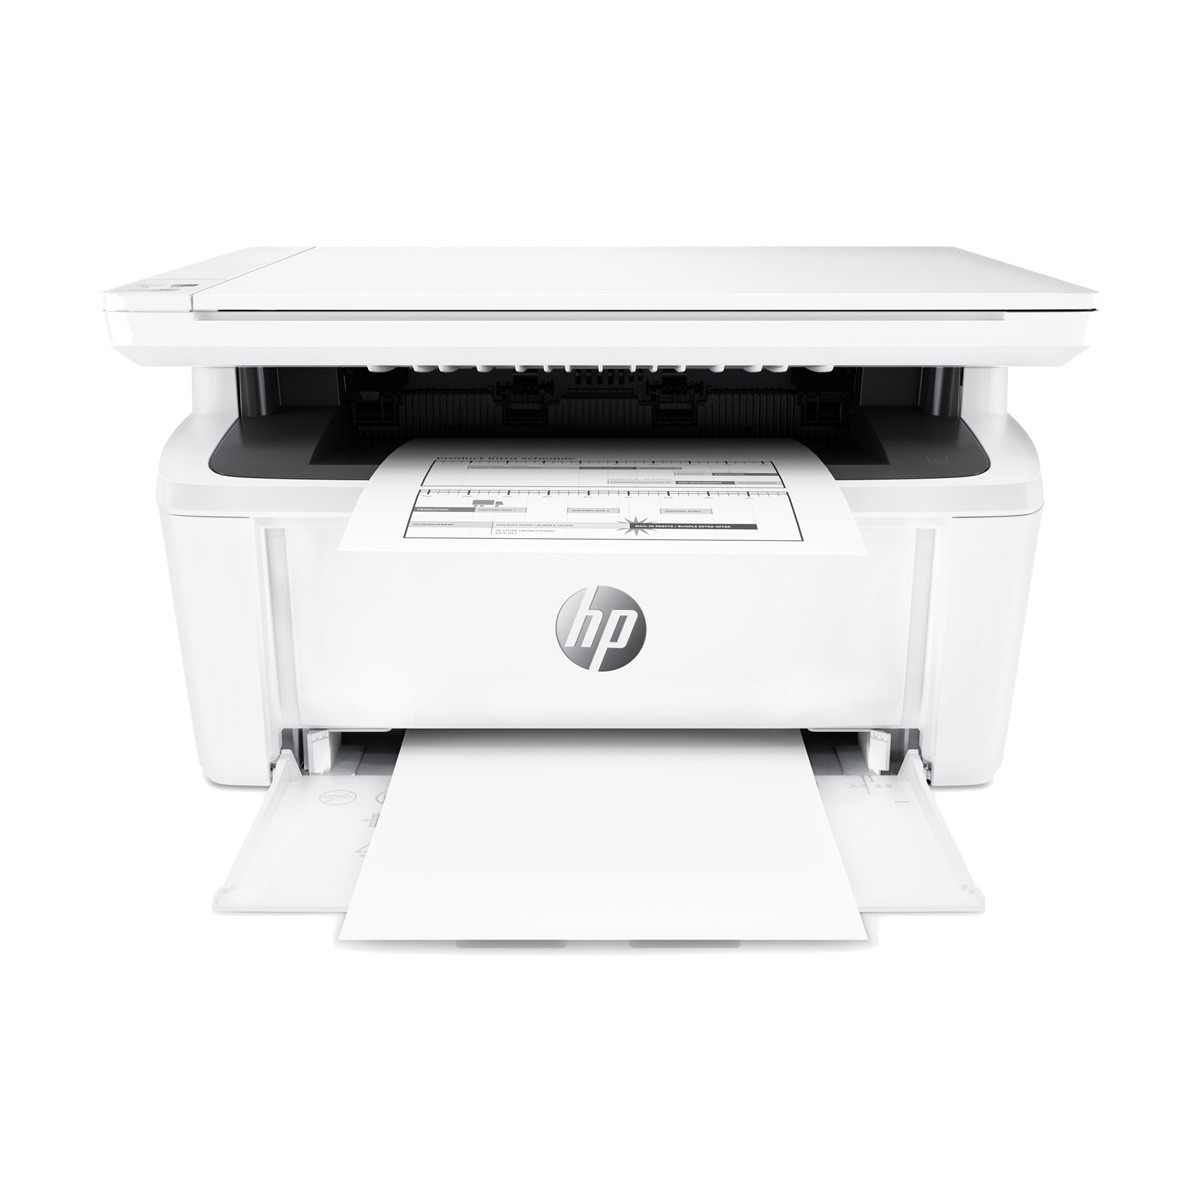 How to make copies on hp laserjet pro mfp